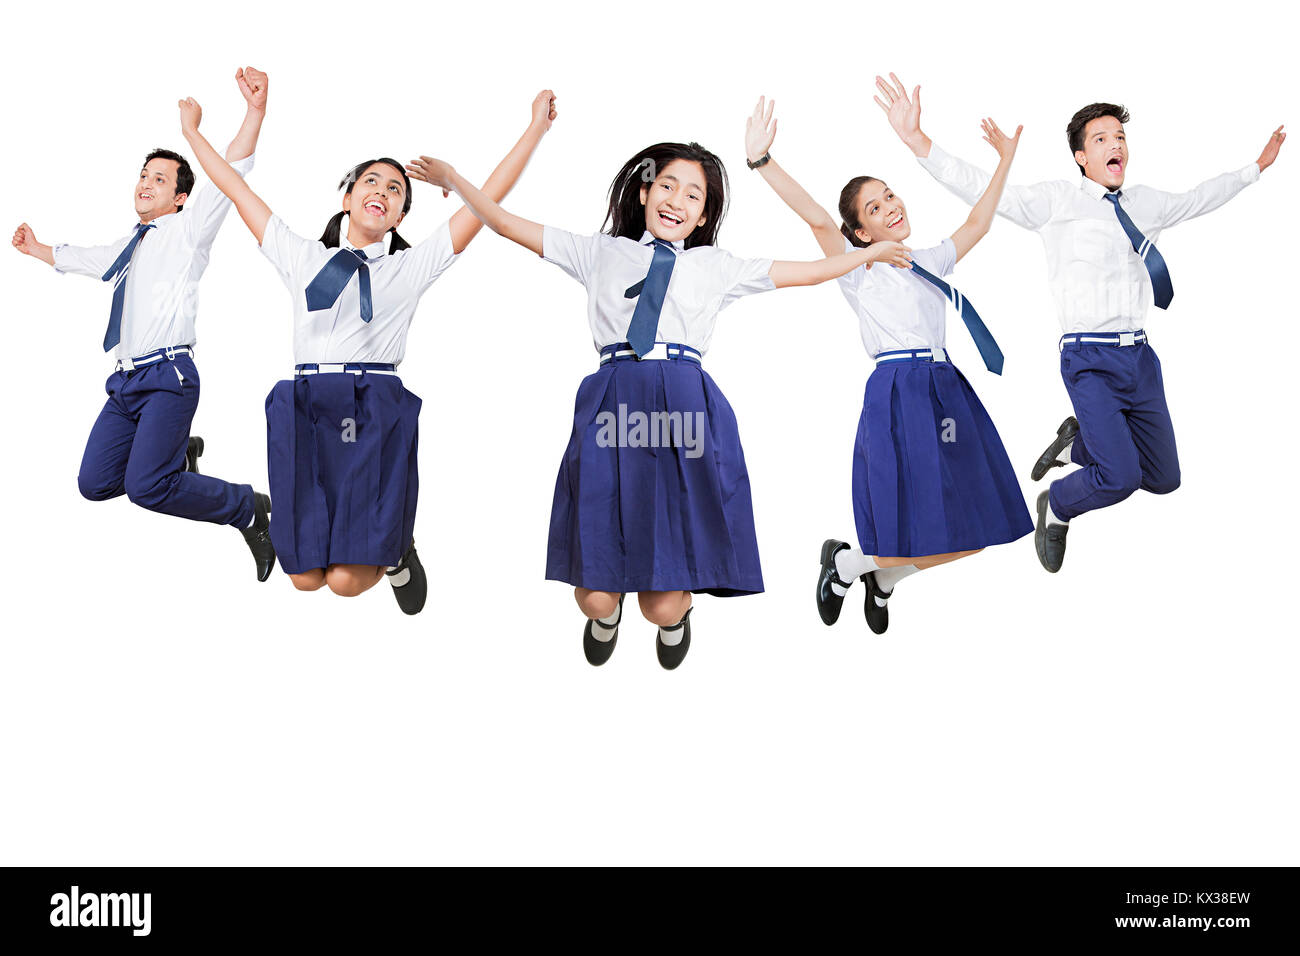 Indian Group Young School Boys And Girls Students Jumping Fun Stock Photo